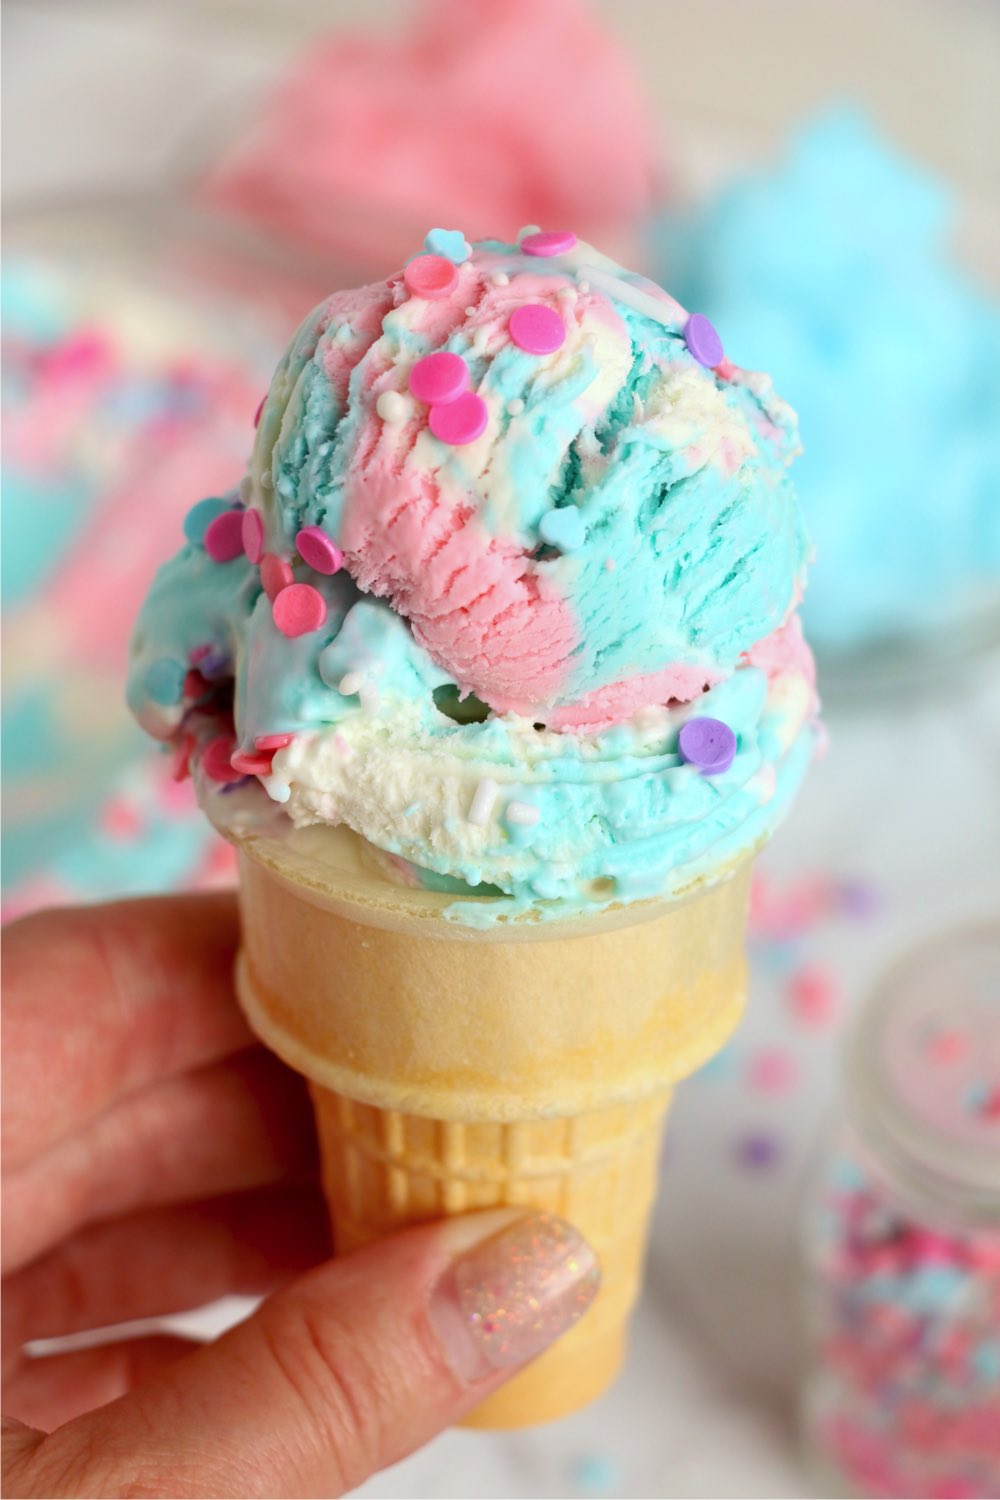 holding an ice cream cone filled with cotton candy ice cream